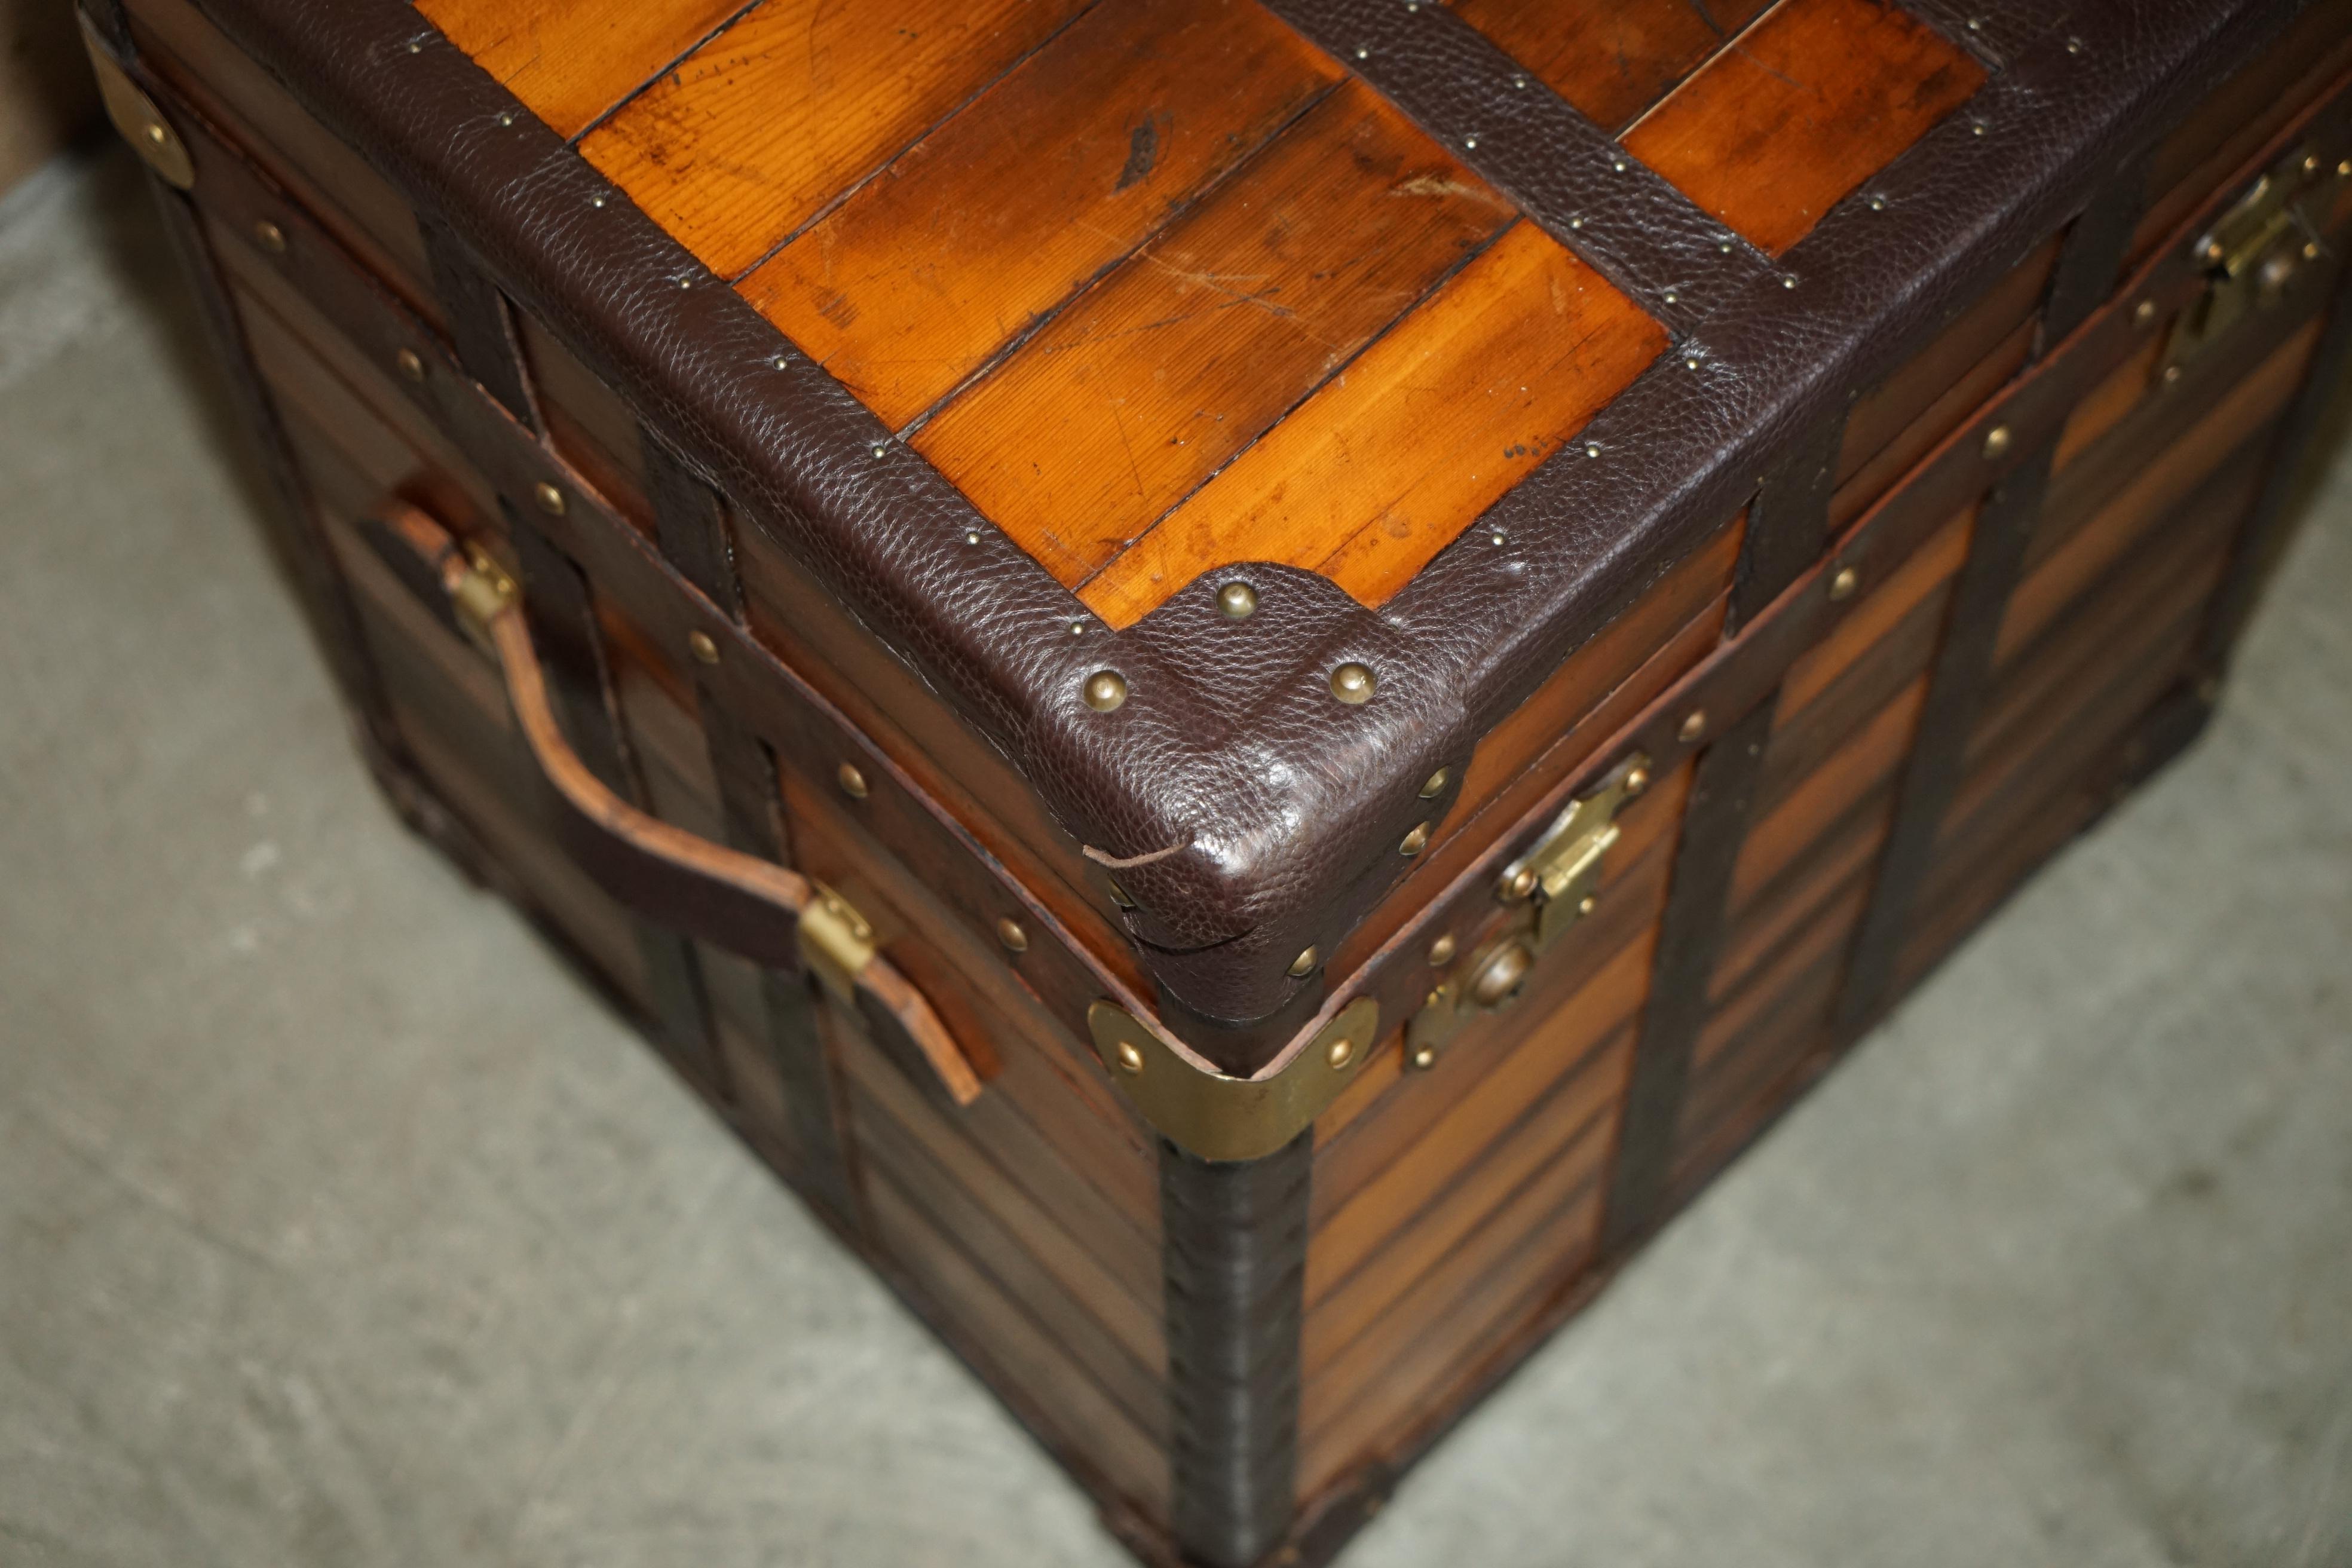 PAIR OF STUNNING ViNTAGE ENGLISH SIDE TABLES STORAGE TRUNKS SLATTED WOOD LEATHER 1